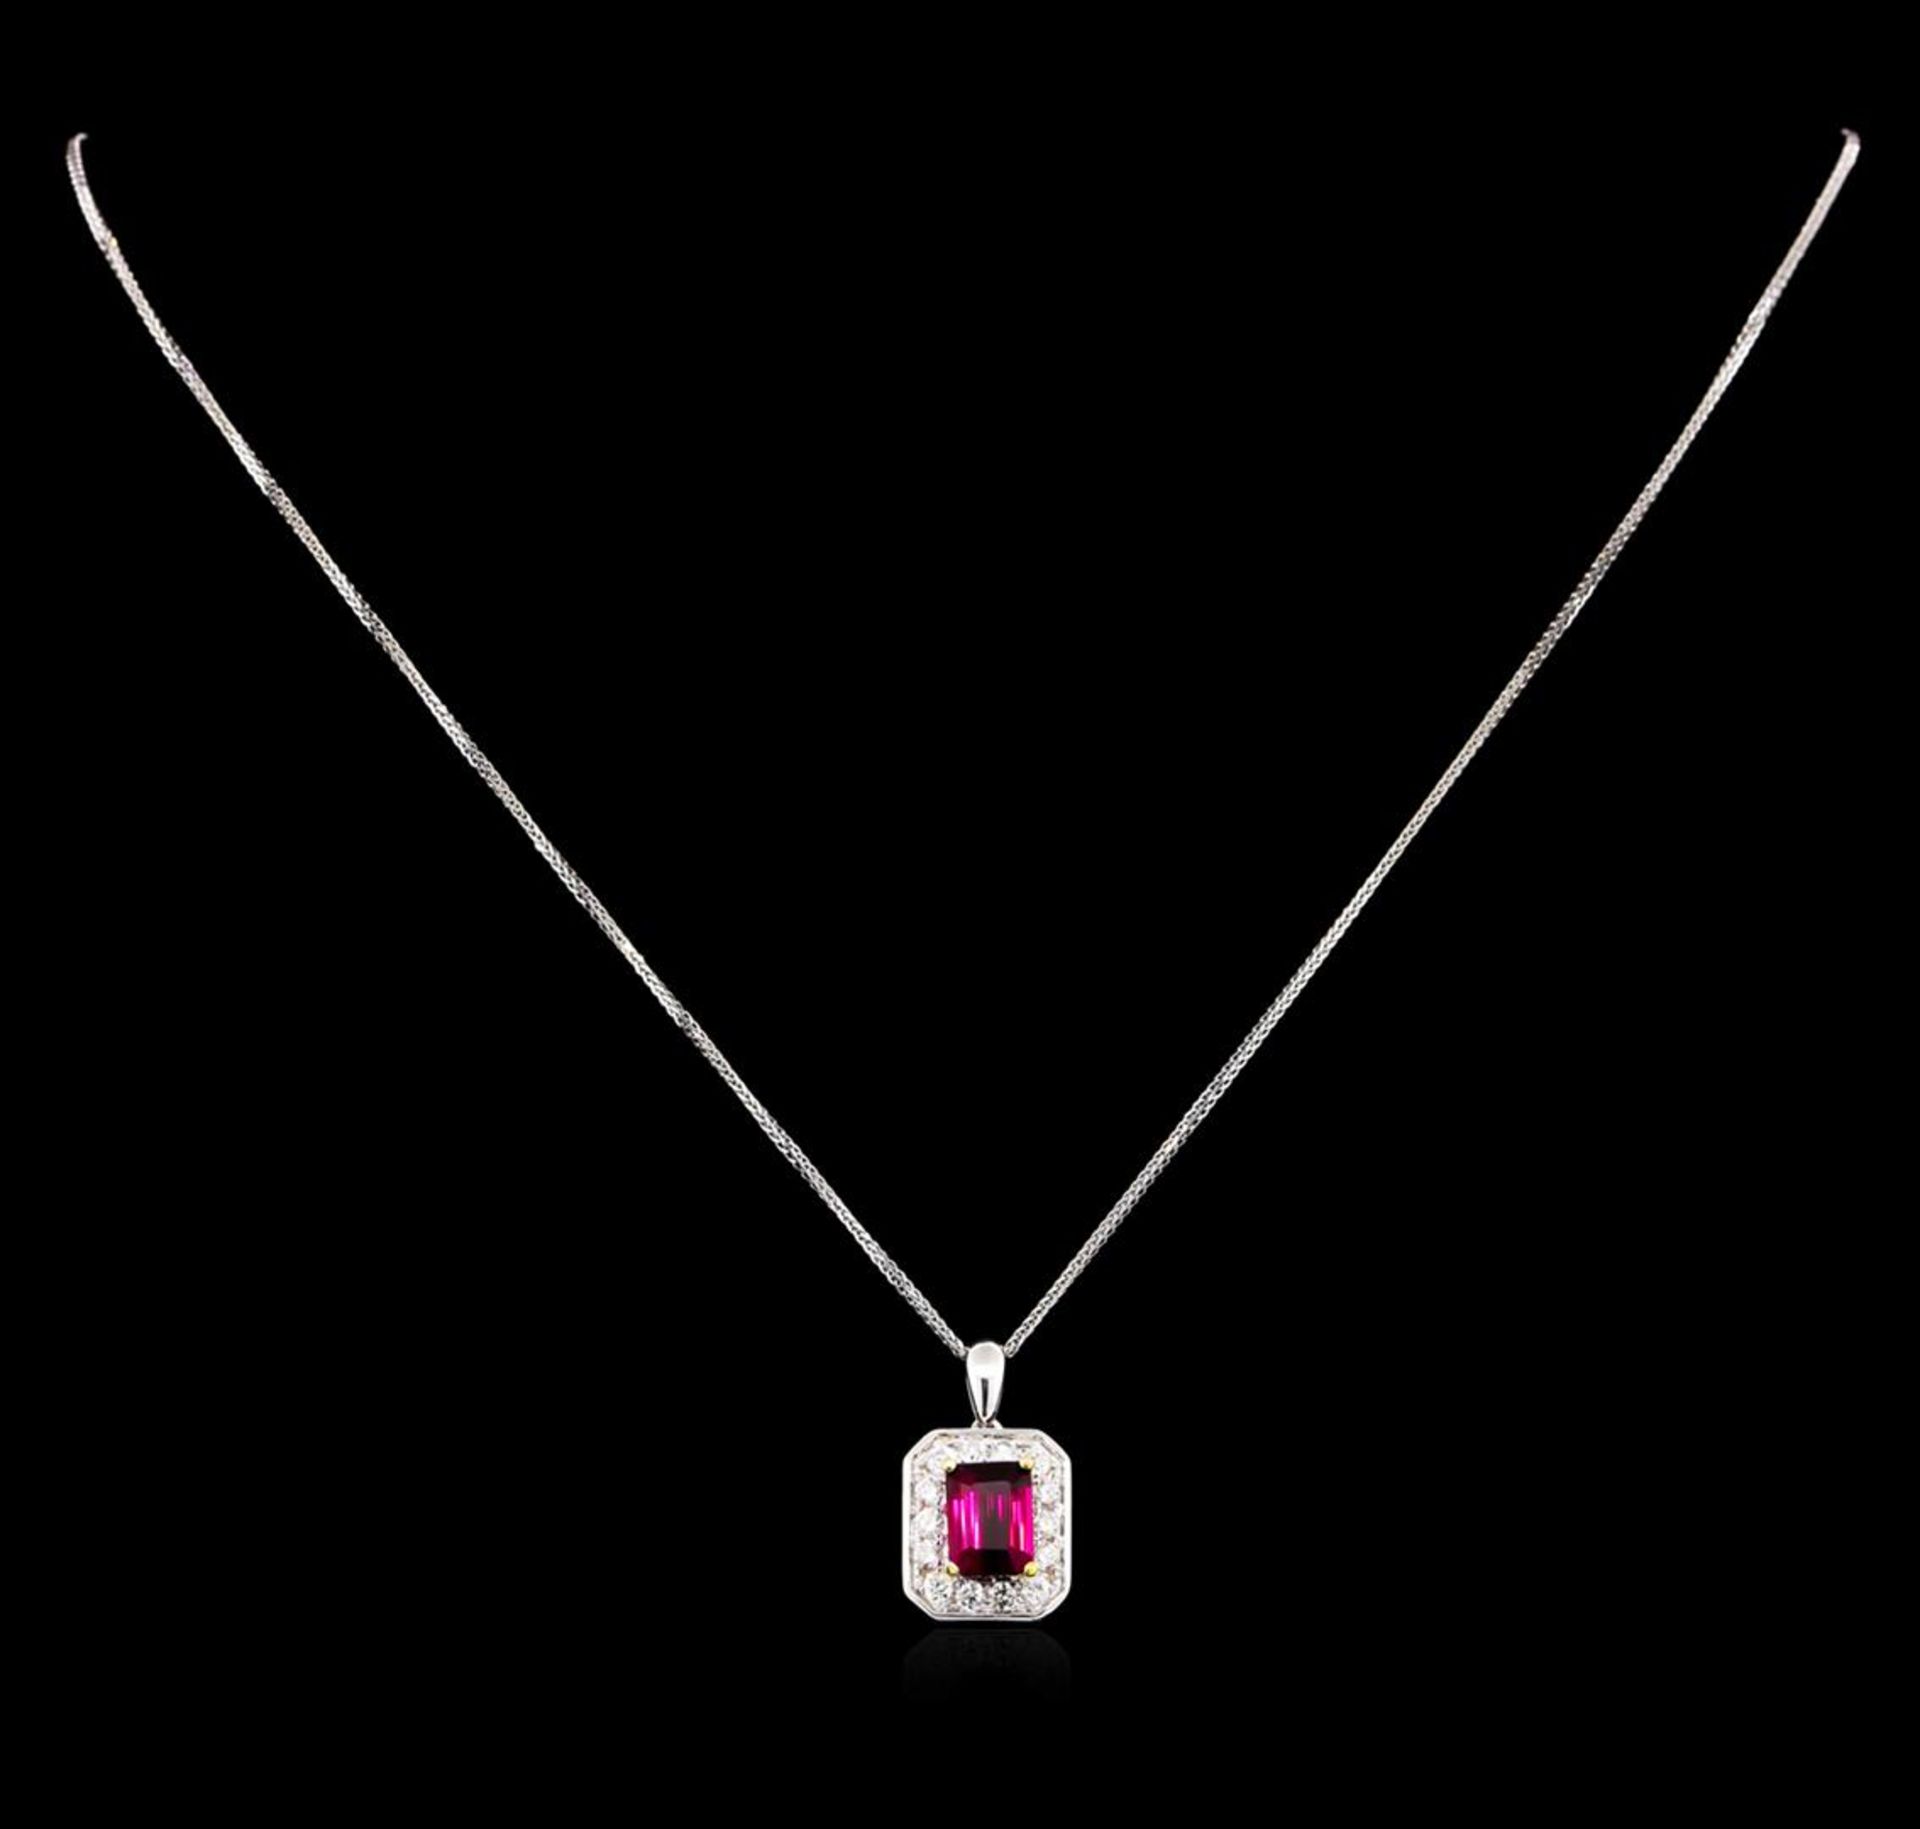 14KT Two-Tone Gold 1.53 ctw Tourmaline and Diamond Pendant With Chain - Image 2 of 3